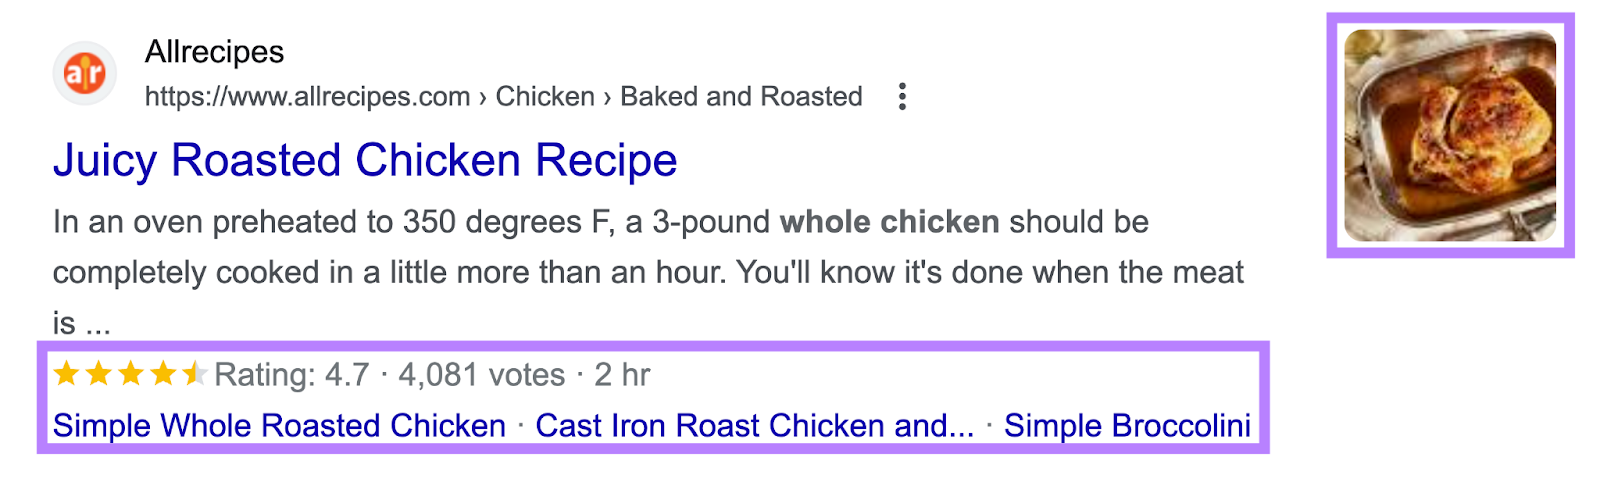 Google result s،wing "Juicy Roasted Chicken Recipe" page with reviews below